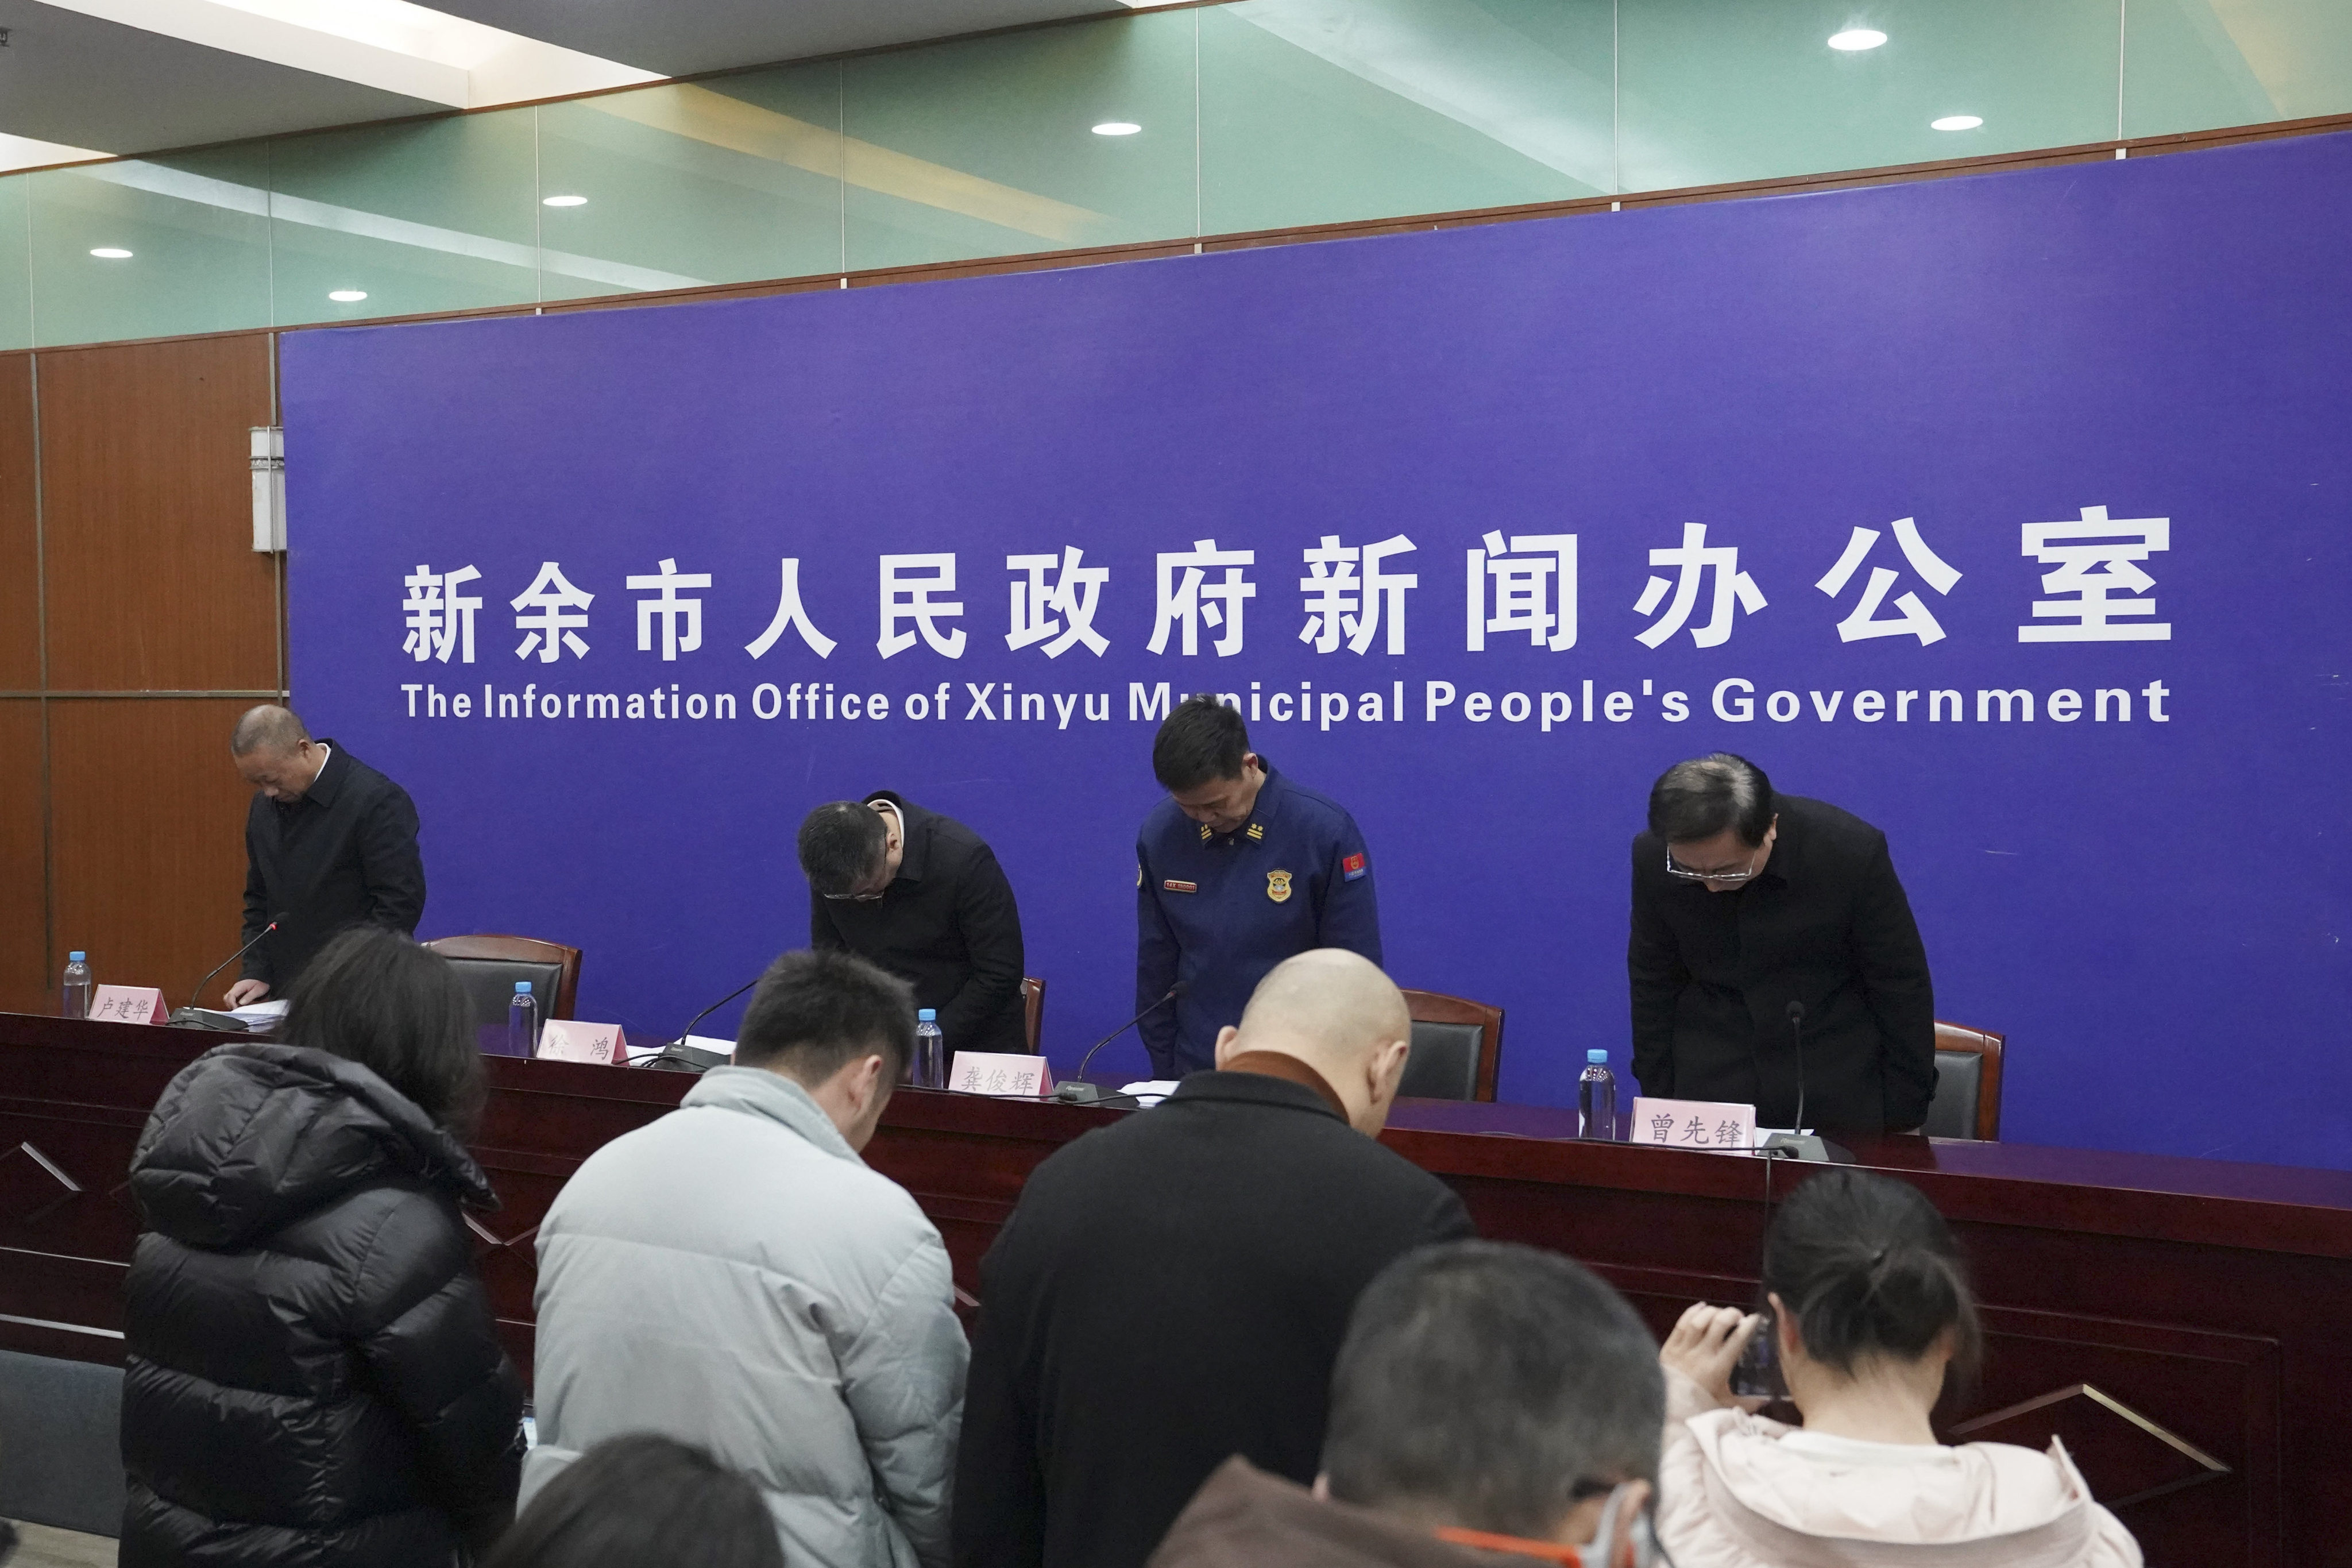 Local officials and members of the press mourn the victims of a fire in Xinyu, Jiangxi province, ahead of a news conference on the accident on Thursday. Photo: Xinhua